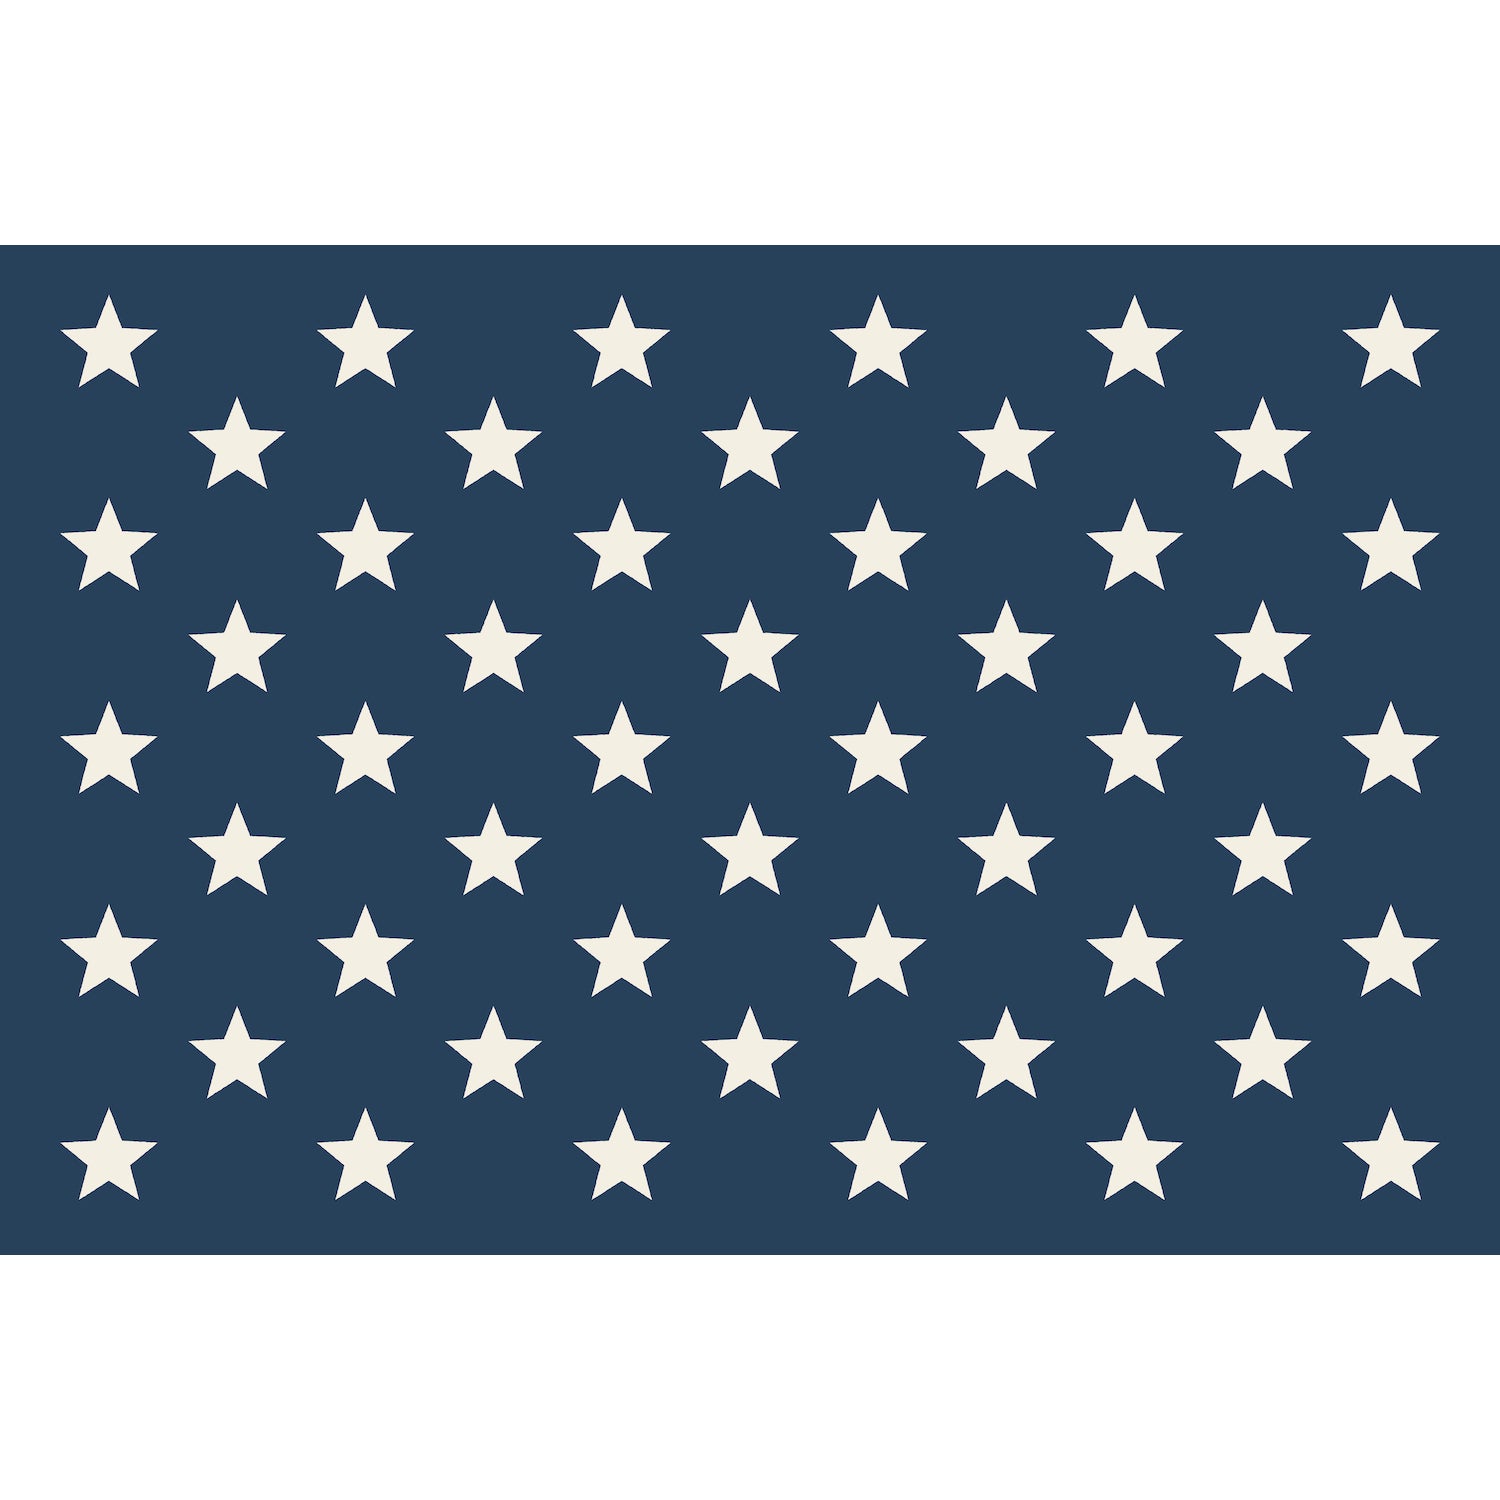 A solid navy blue background containing fifty evenly-spaced white stars; a design identical to the canton of the United States flag. 